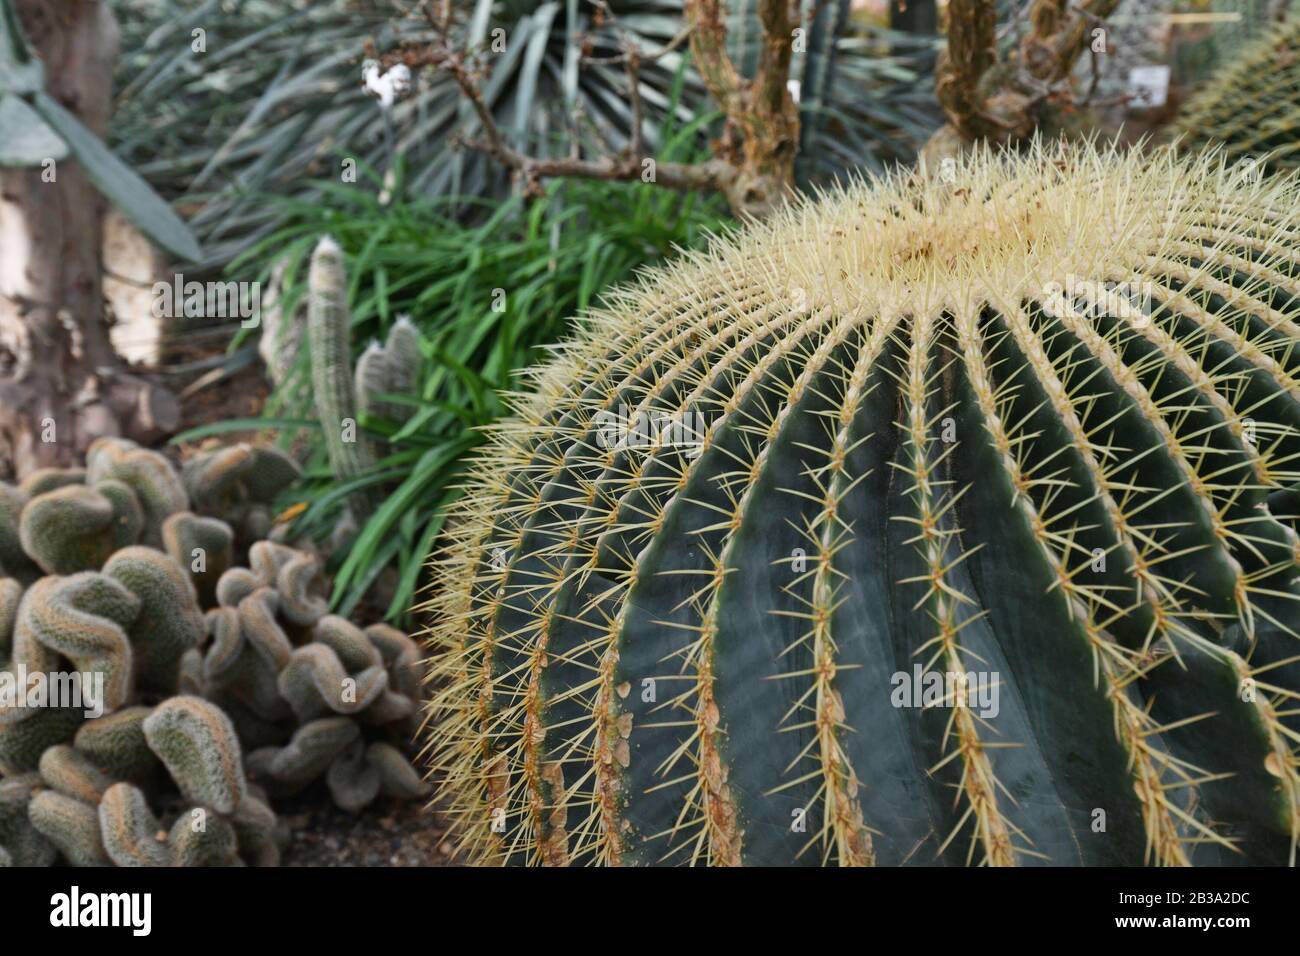 Big 'Echinocactus Grusonii' Golden Barrel Ball or 'Mother In Law Cushion' cactus with other cacti in blurry background Stock Photo